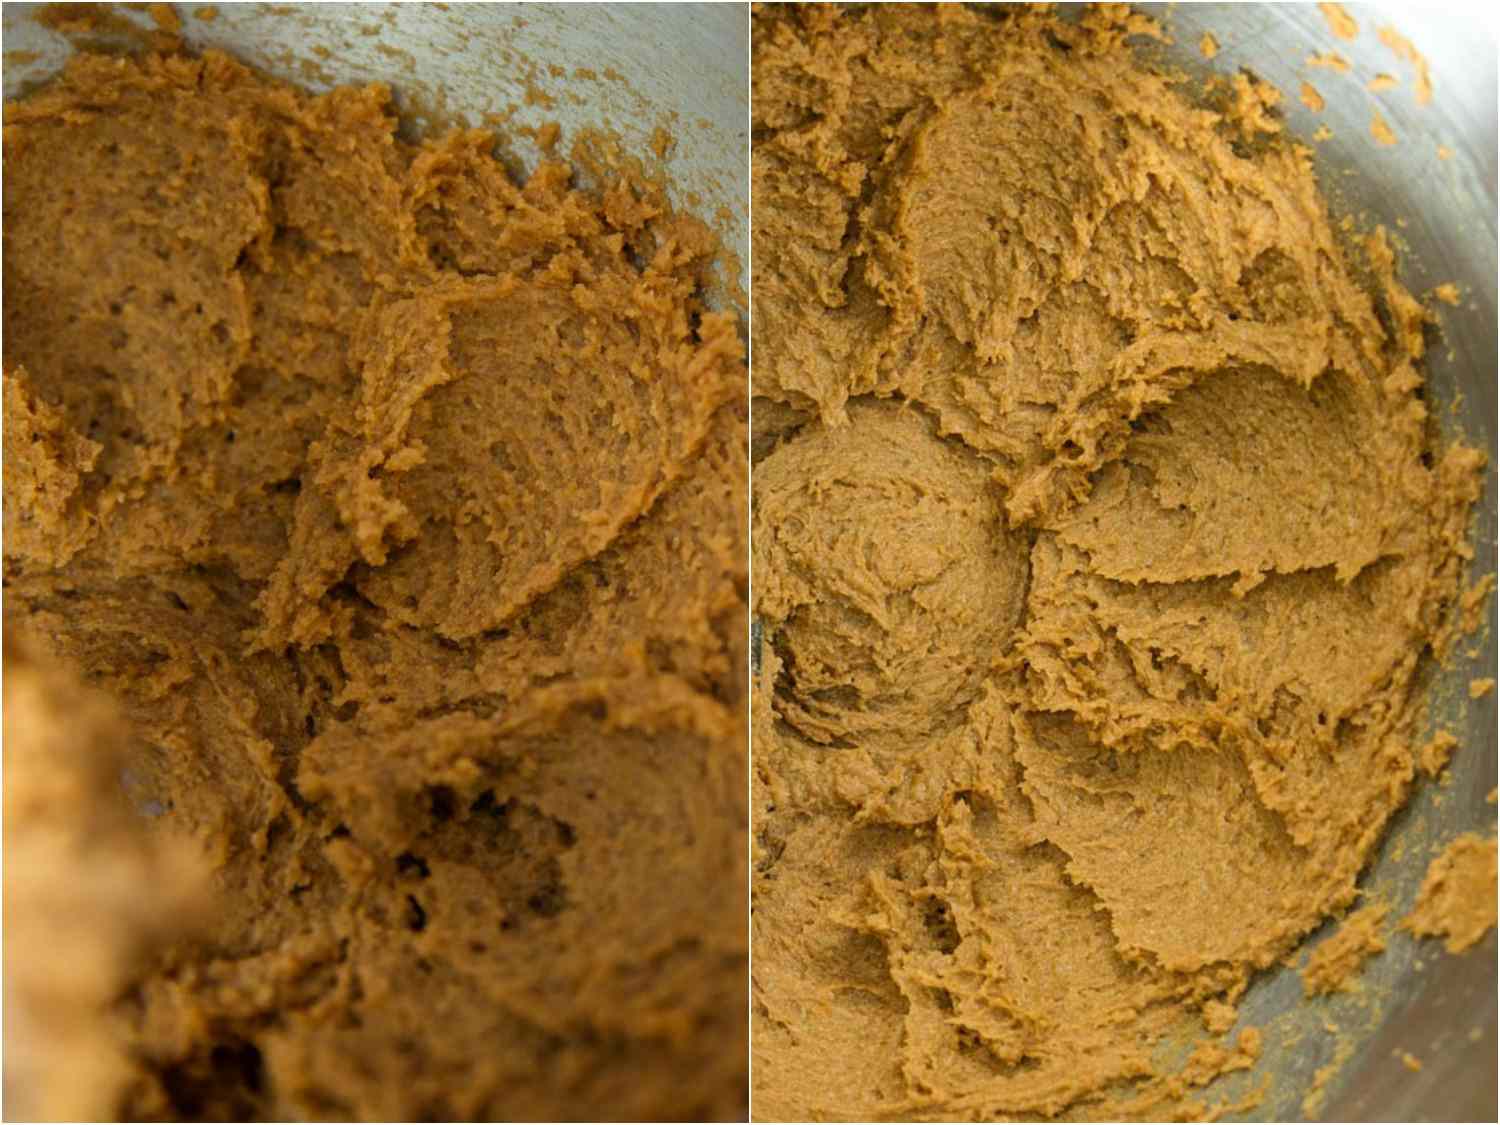 Before and after photos of the butter mixture. The finished, fully creamed mixture on the right is noticeably lighter in color.